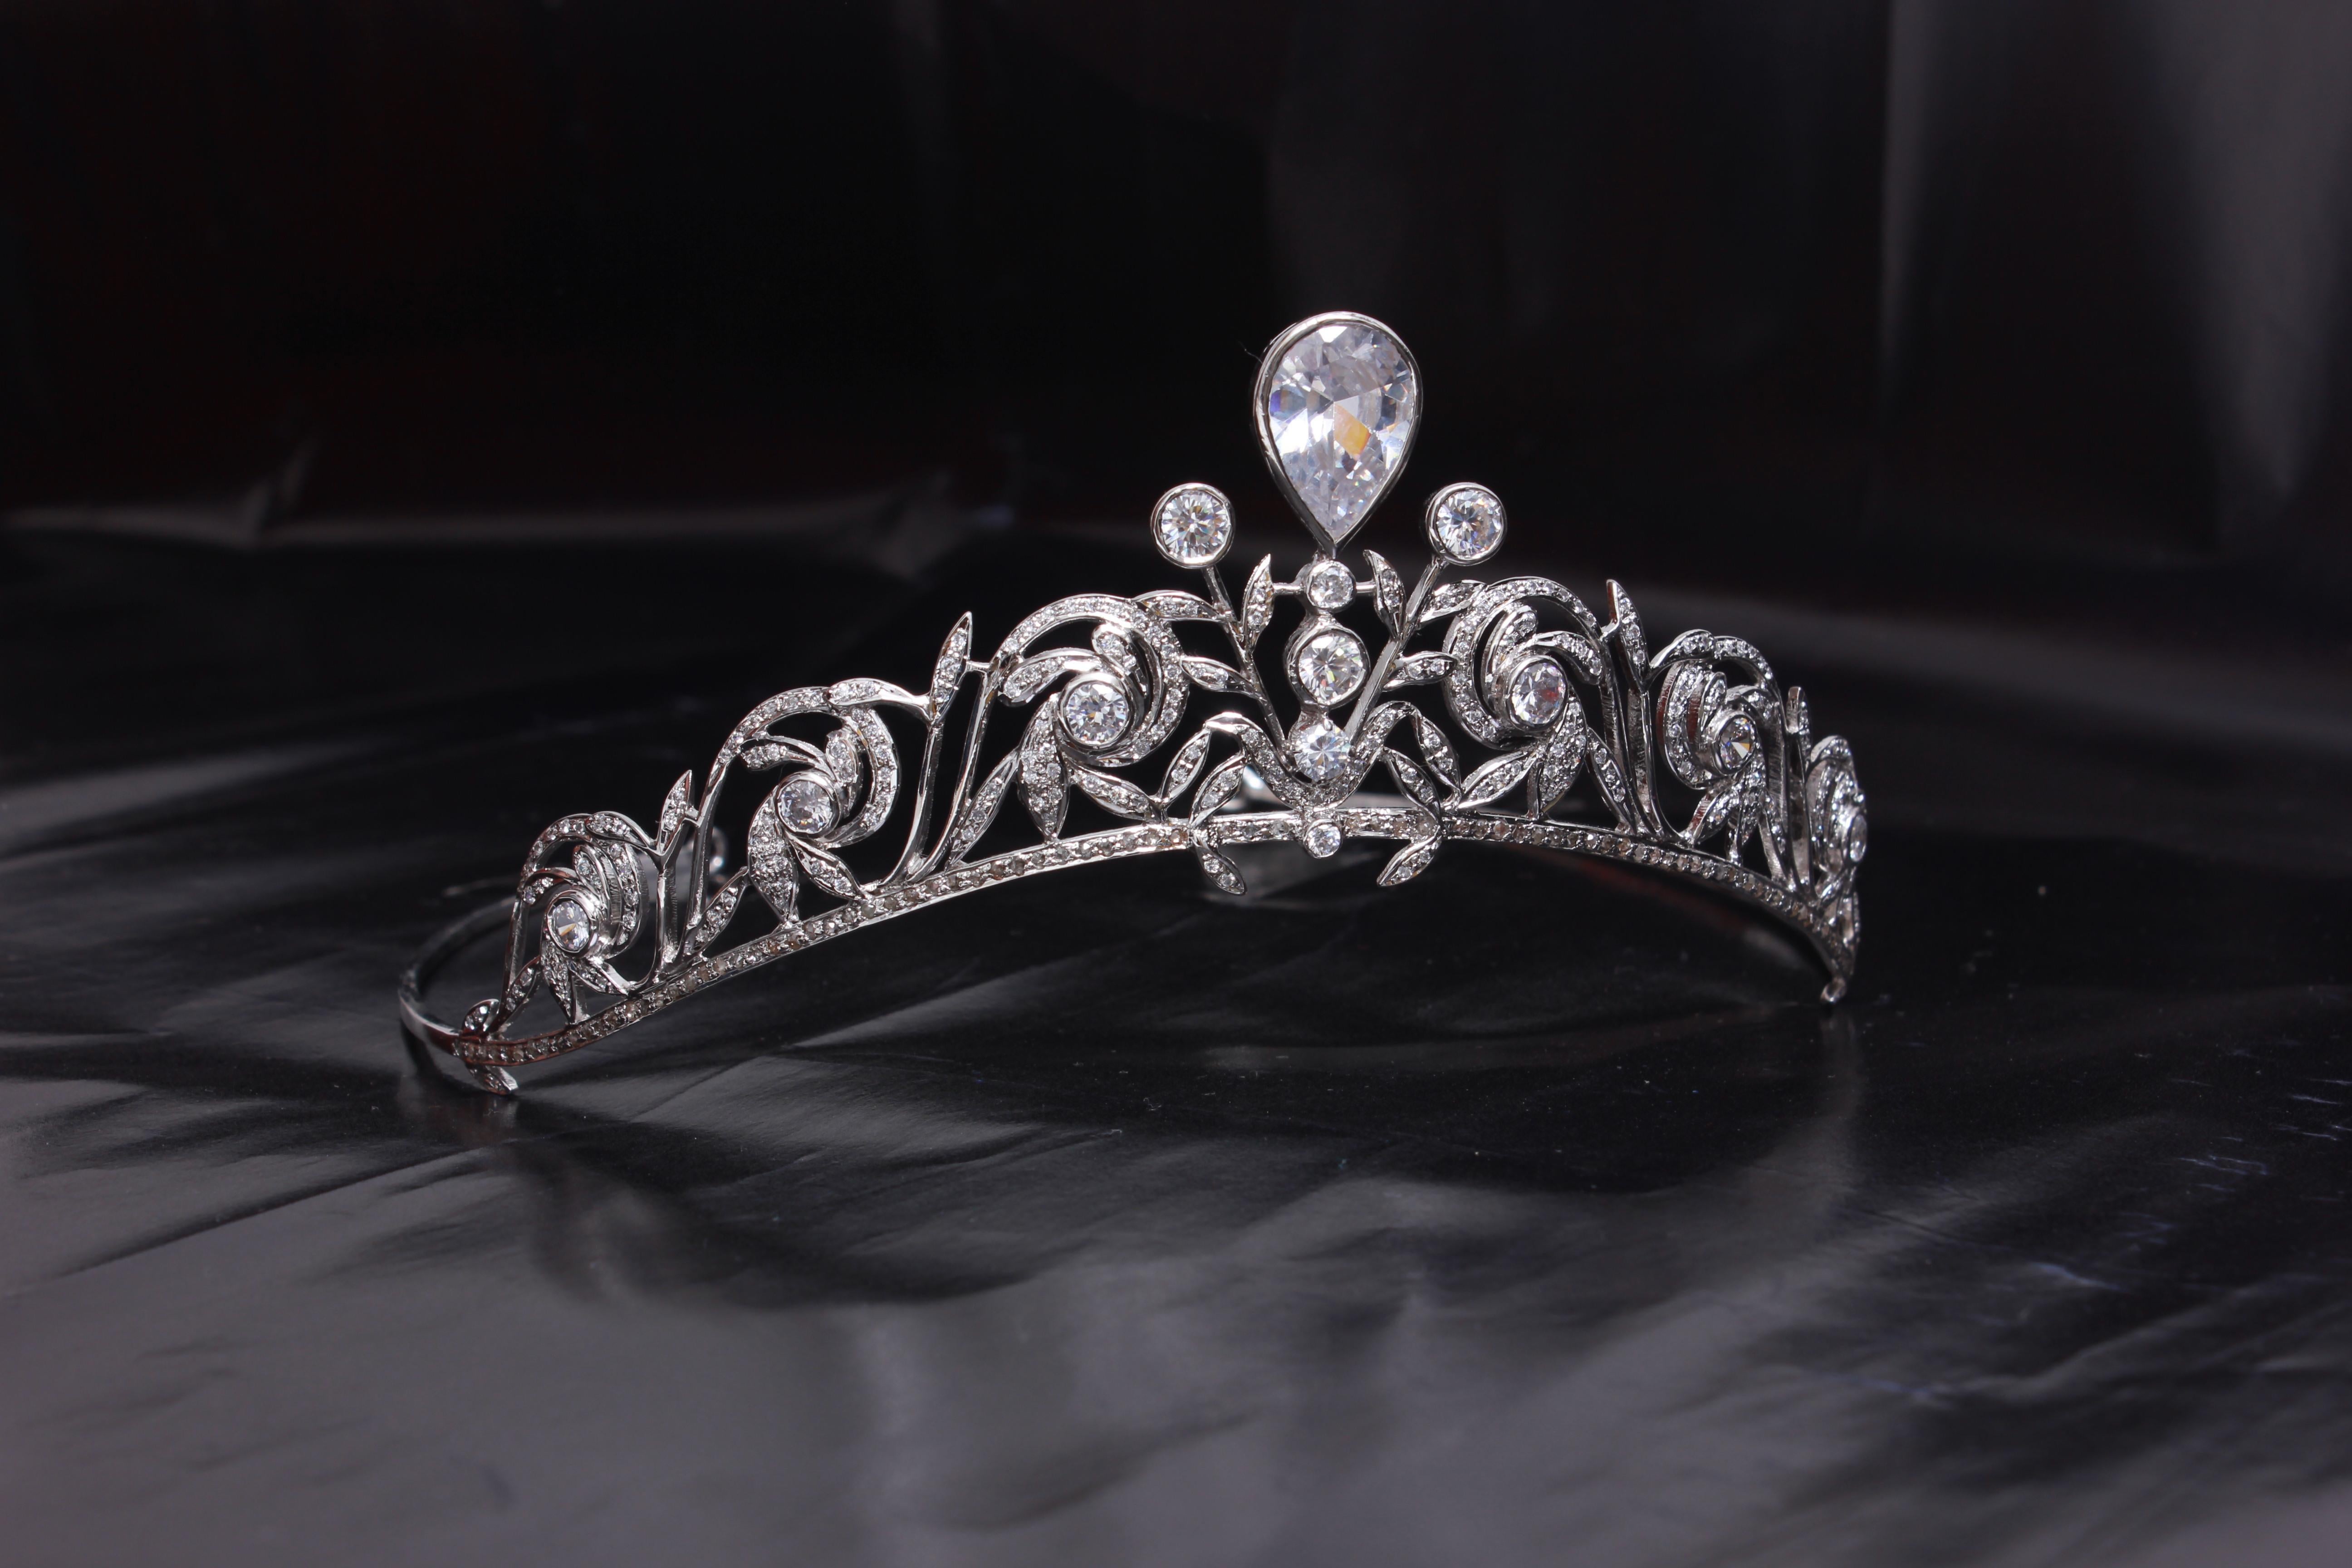 For the queen in you!
This royal tiara is a symbol of beauty and self-love. It is handmade with Natural pave diamonds and white topaz in sterling silver. 
Diamond- Pave diamonds
Diamond color- White with a tint of grey

Gemstone type- White